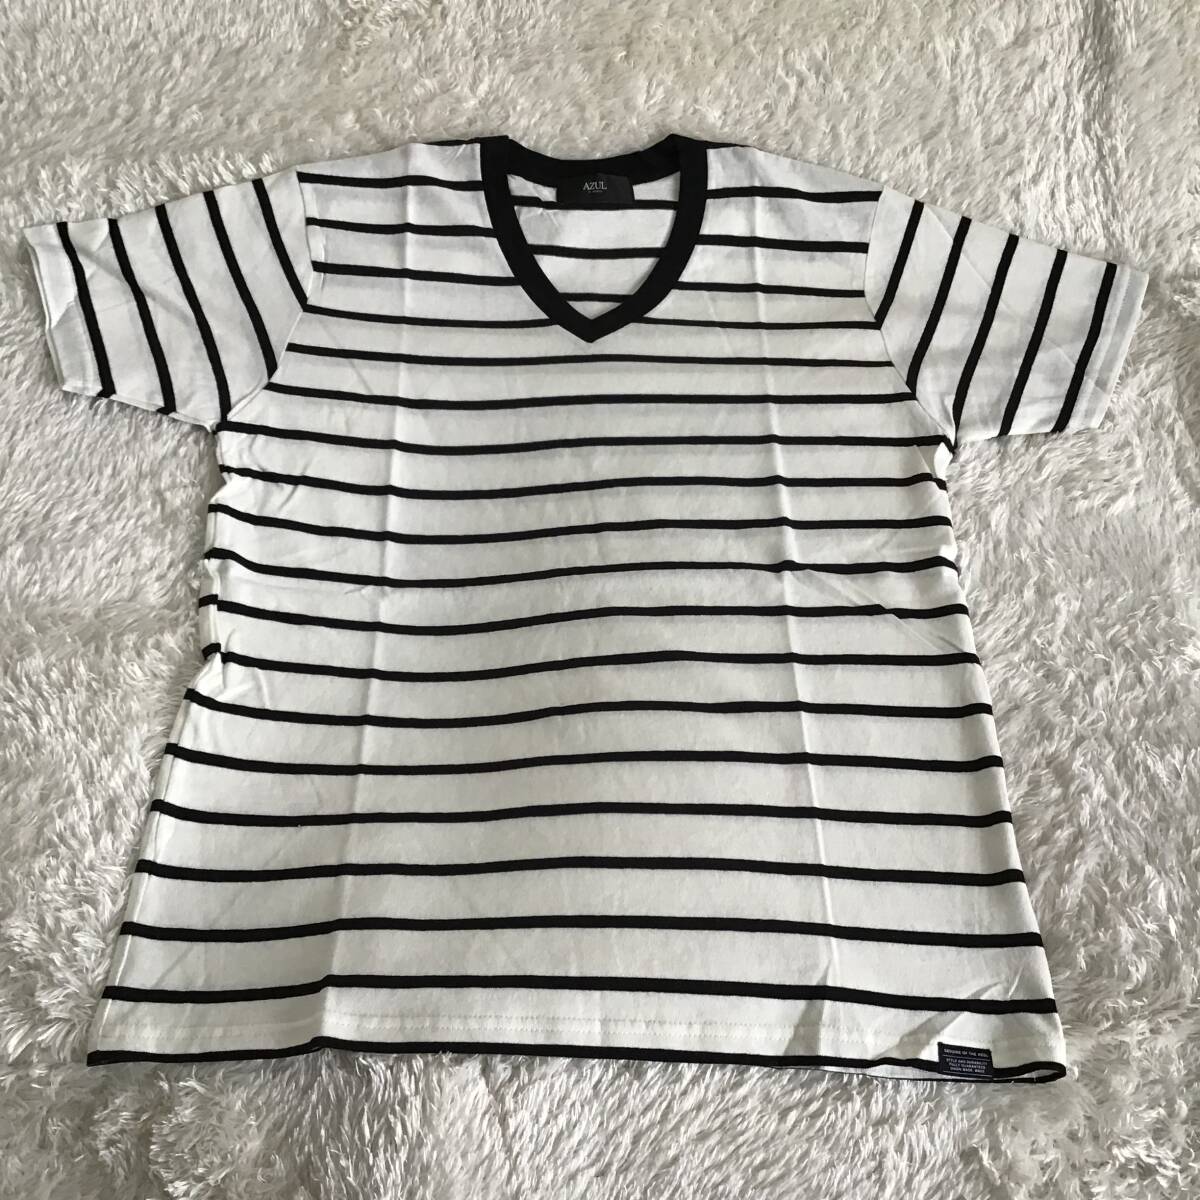  azur bai Moussy T-shirt lady's M size new goods unused anonymity delivery 